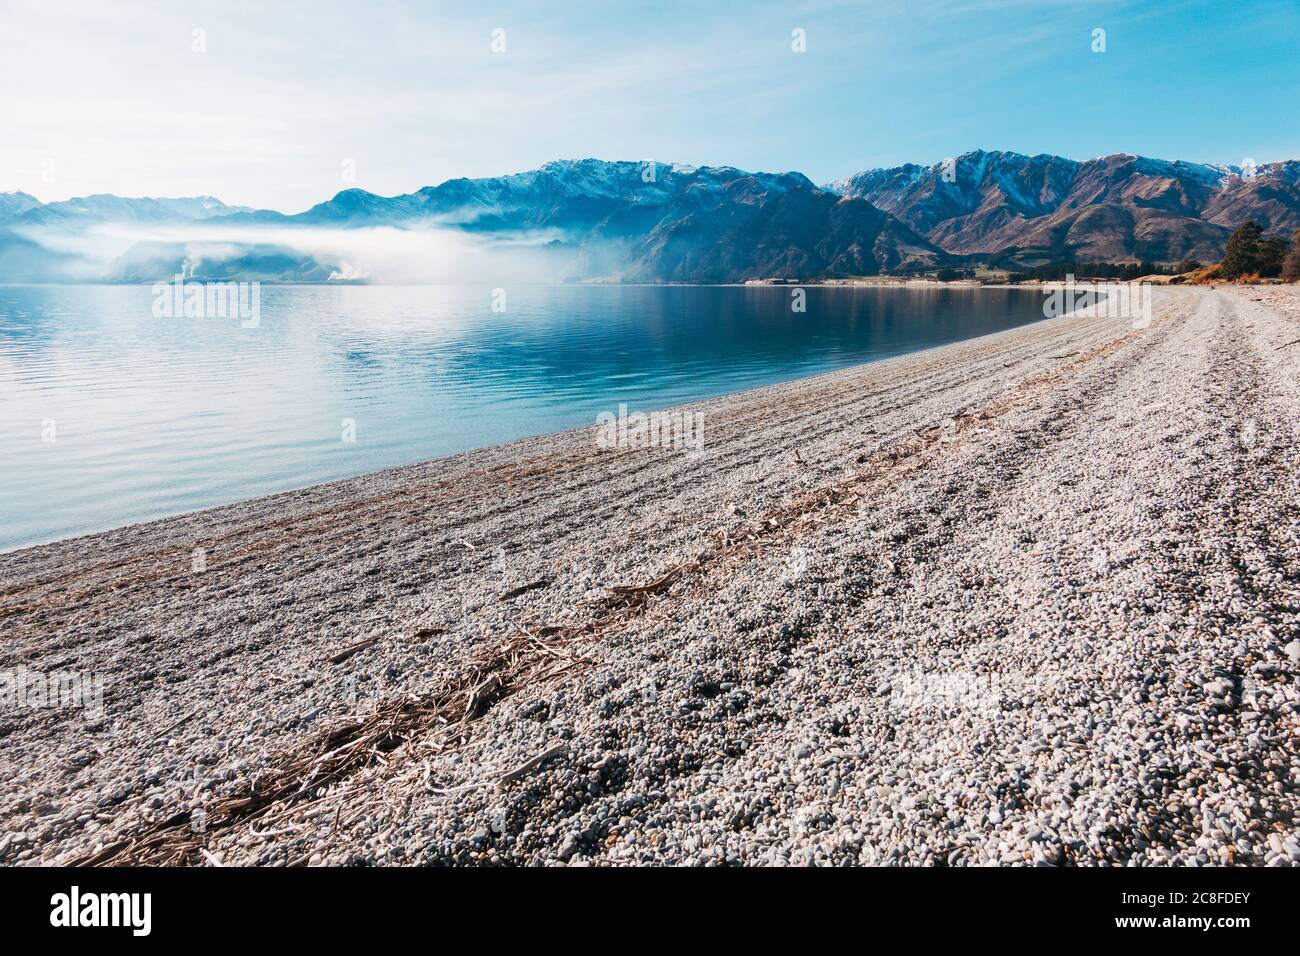 A calm, clear sunny winter day on Scotts Beach, Lake Hawea in the South Island of New Zealand. A farm burn off casts a layer of smoke across the bay Stock Photo